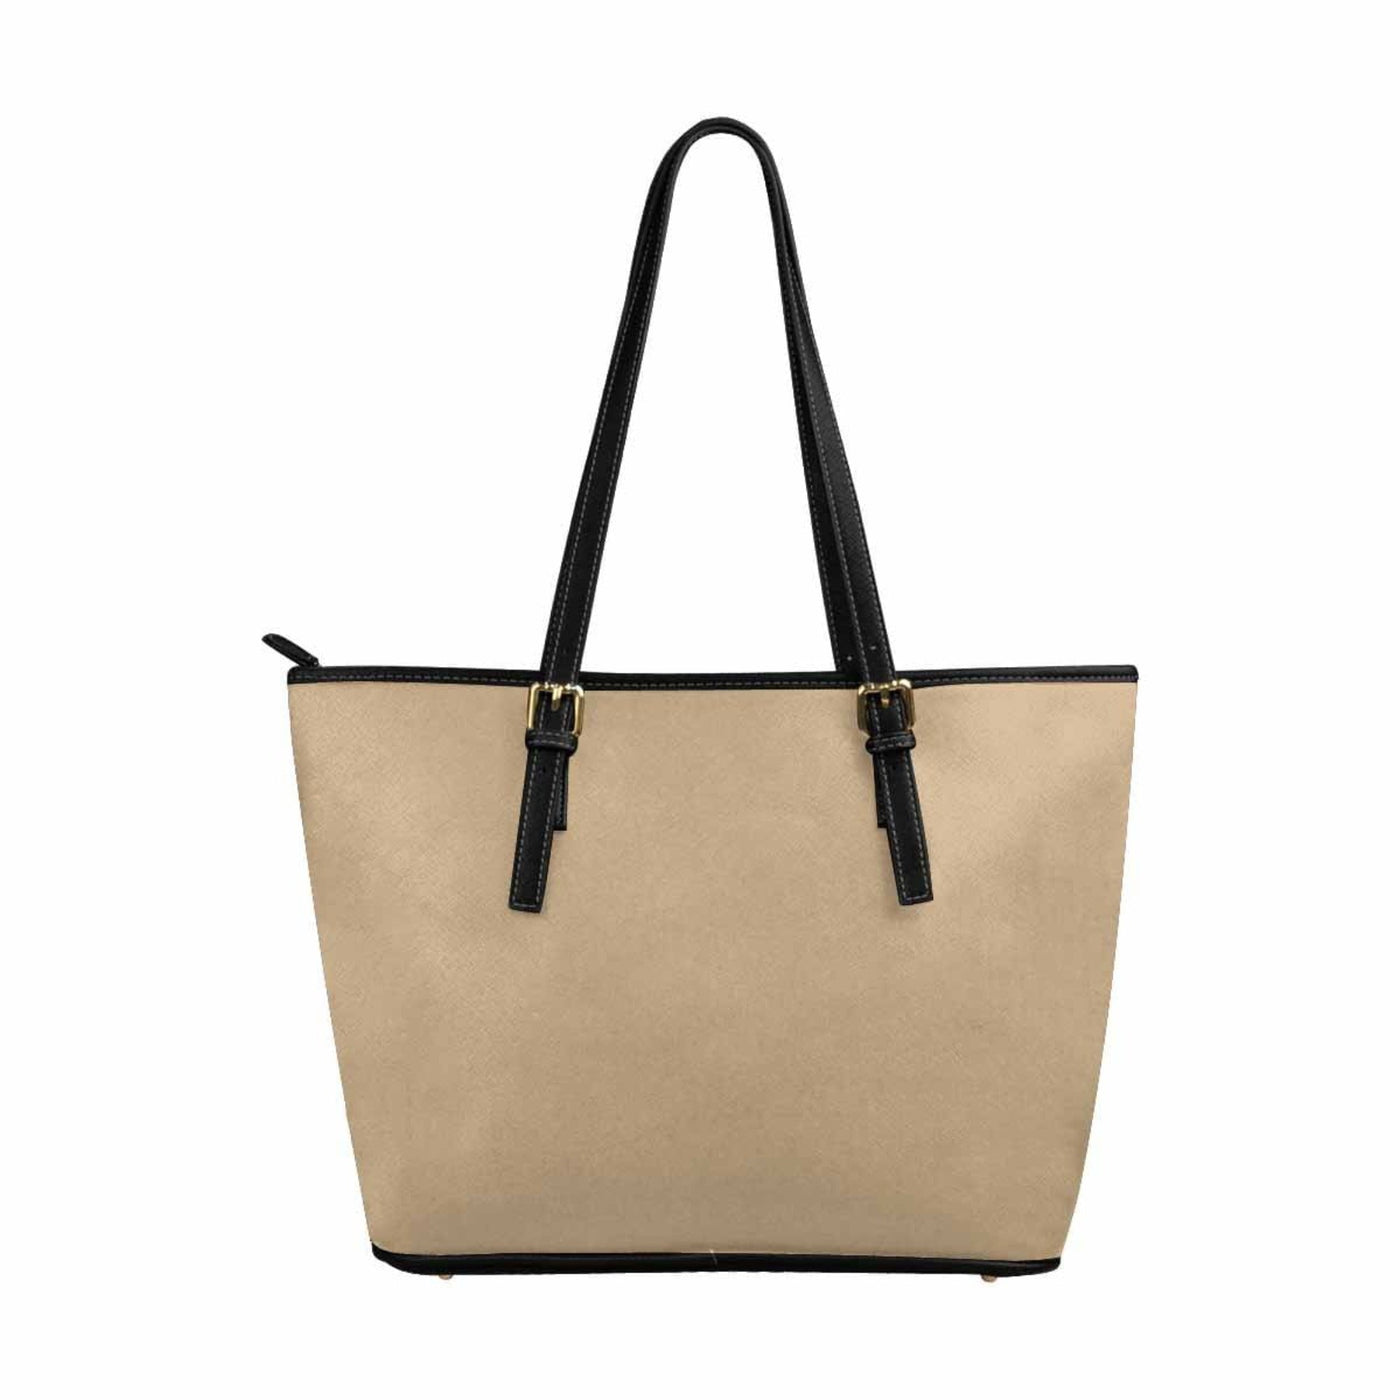 Large Leather Tote Shoulder Bag - Tan Brown - Bags | Leather Tote Bags